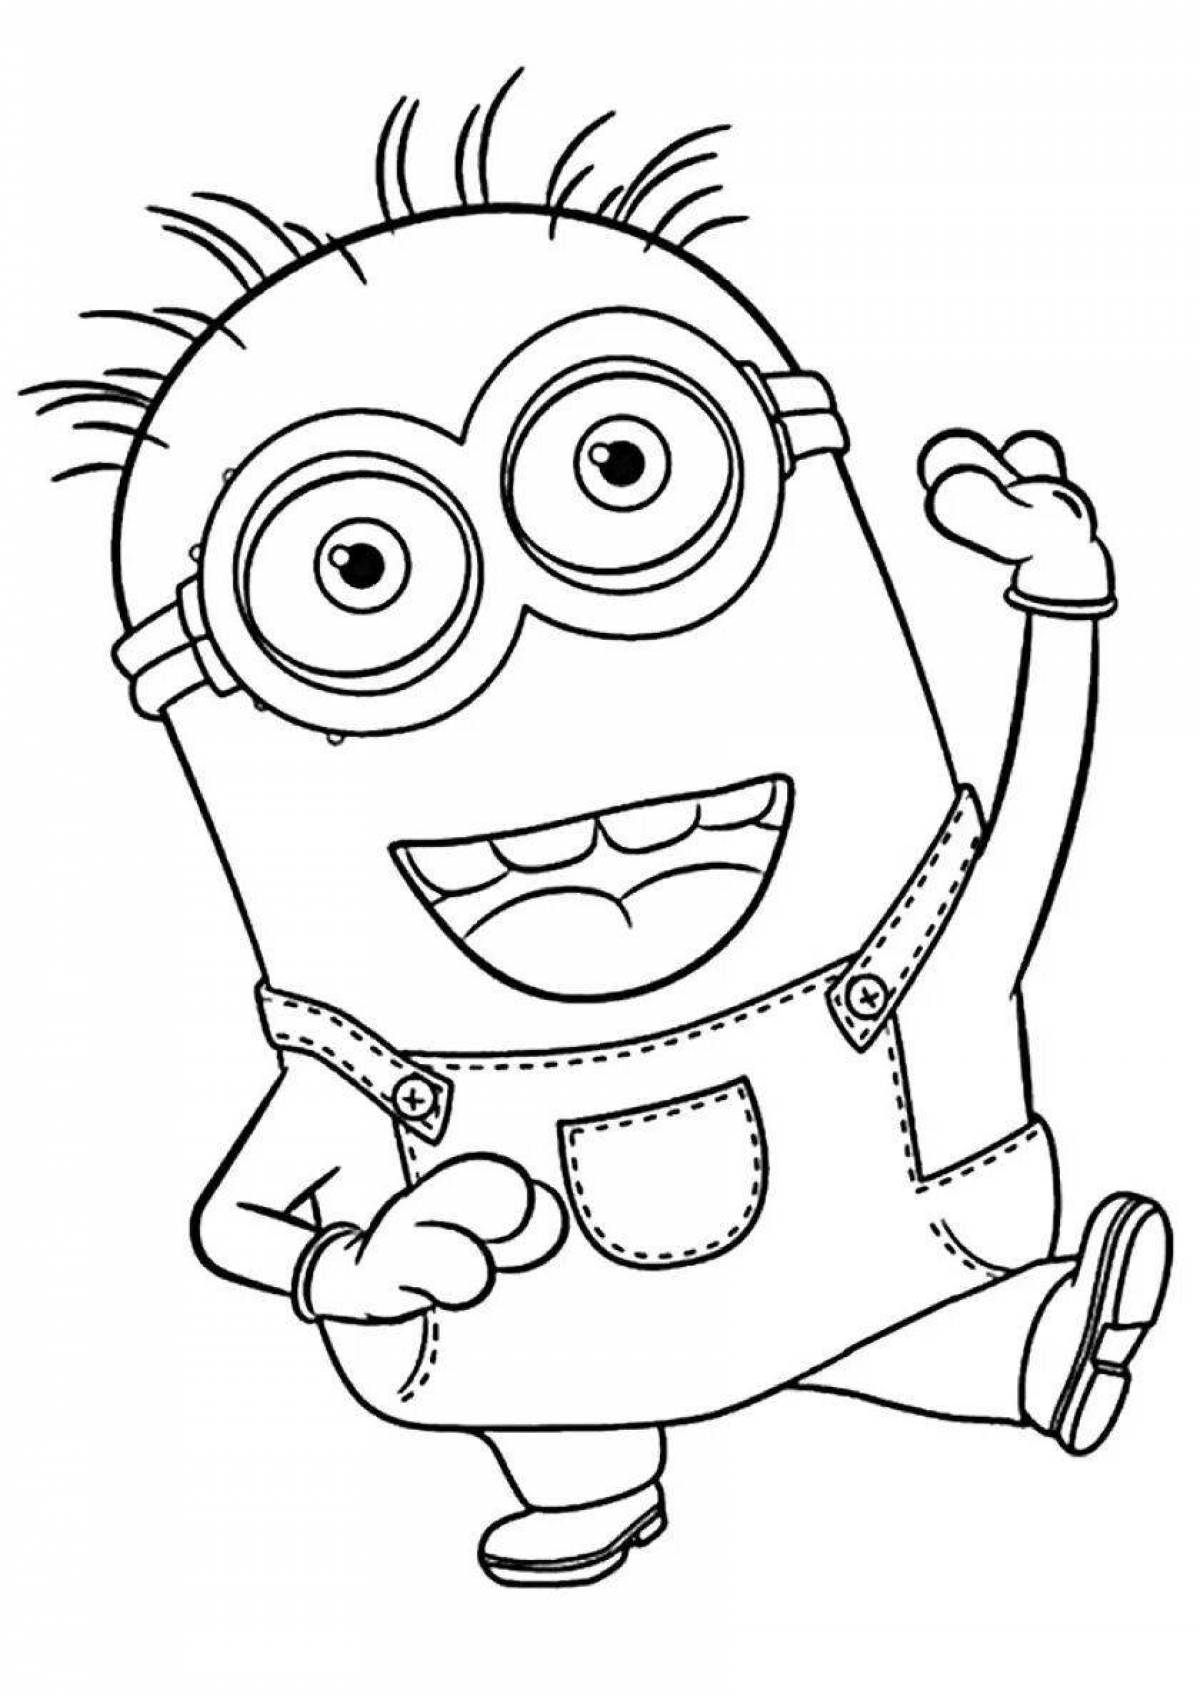 Excellent minion coloring book for kids